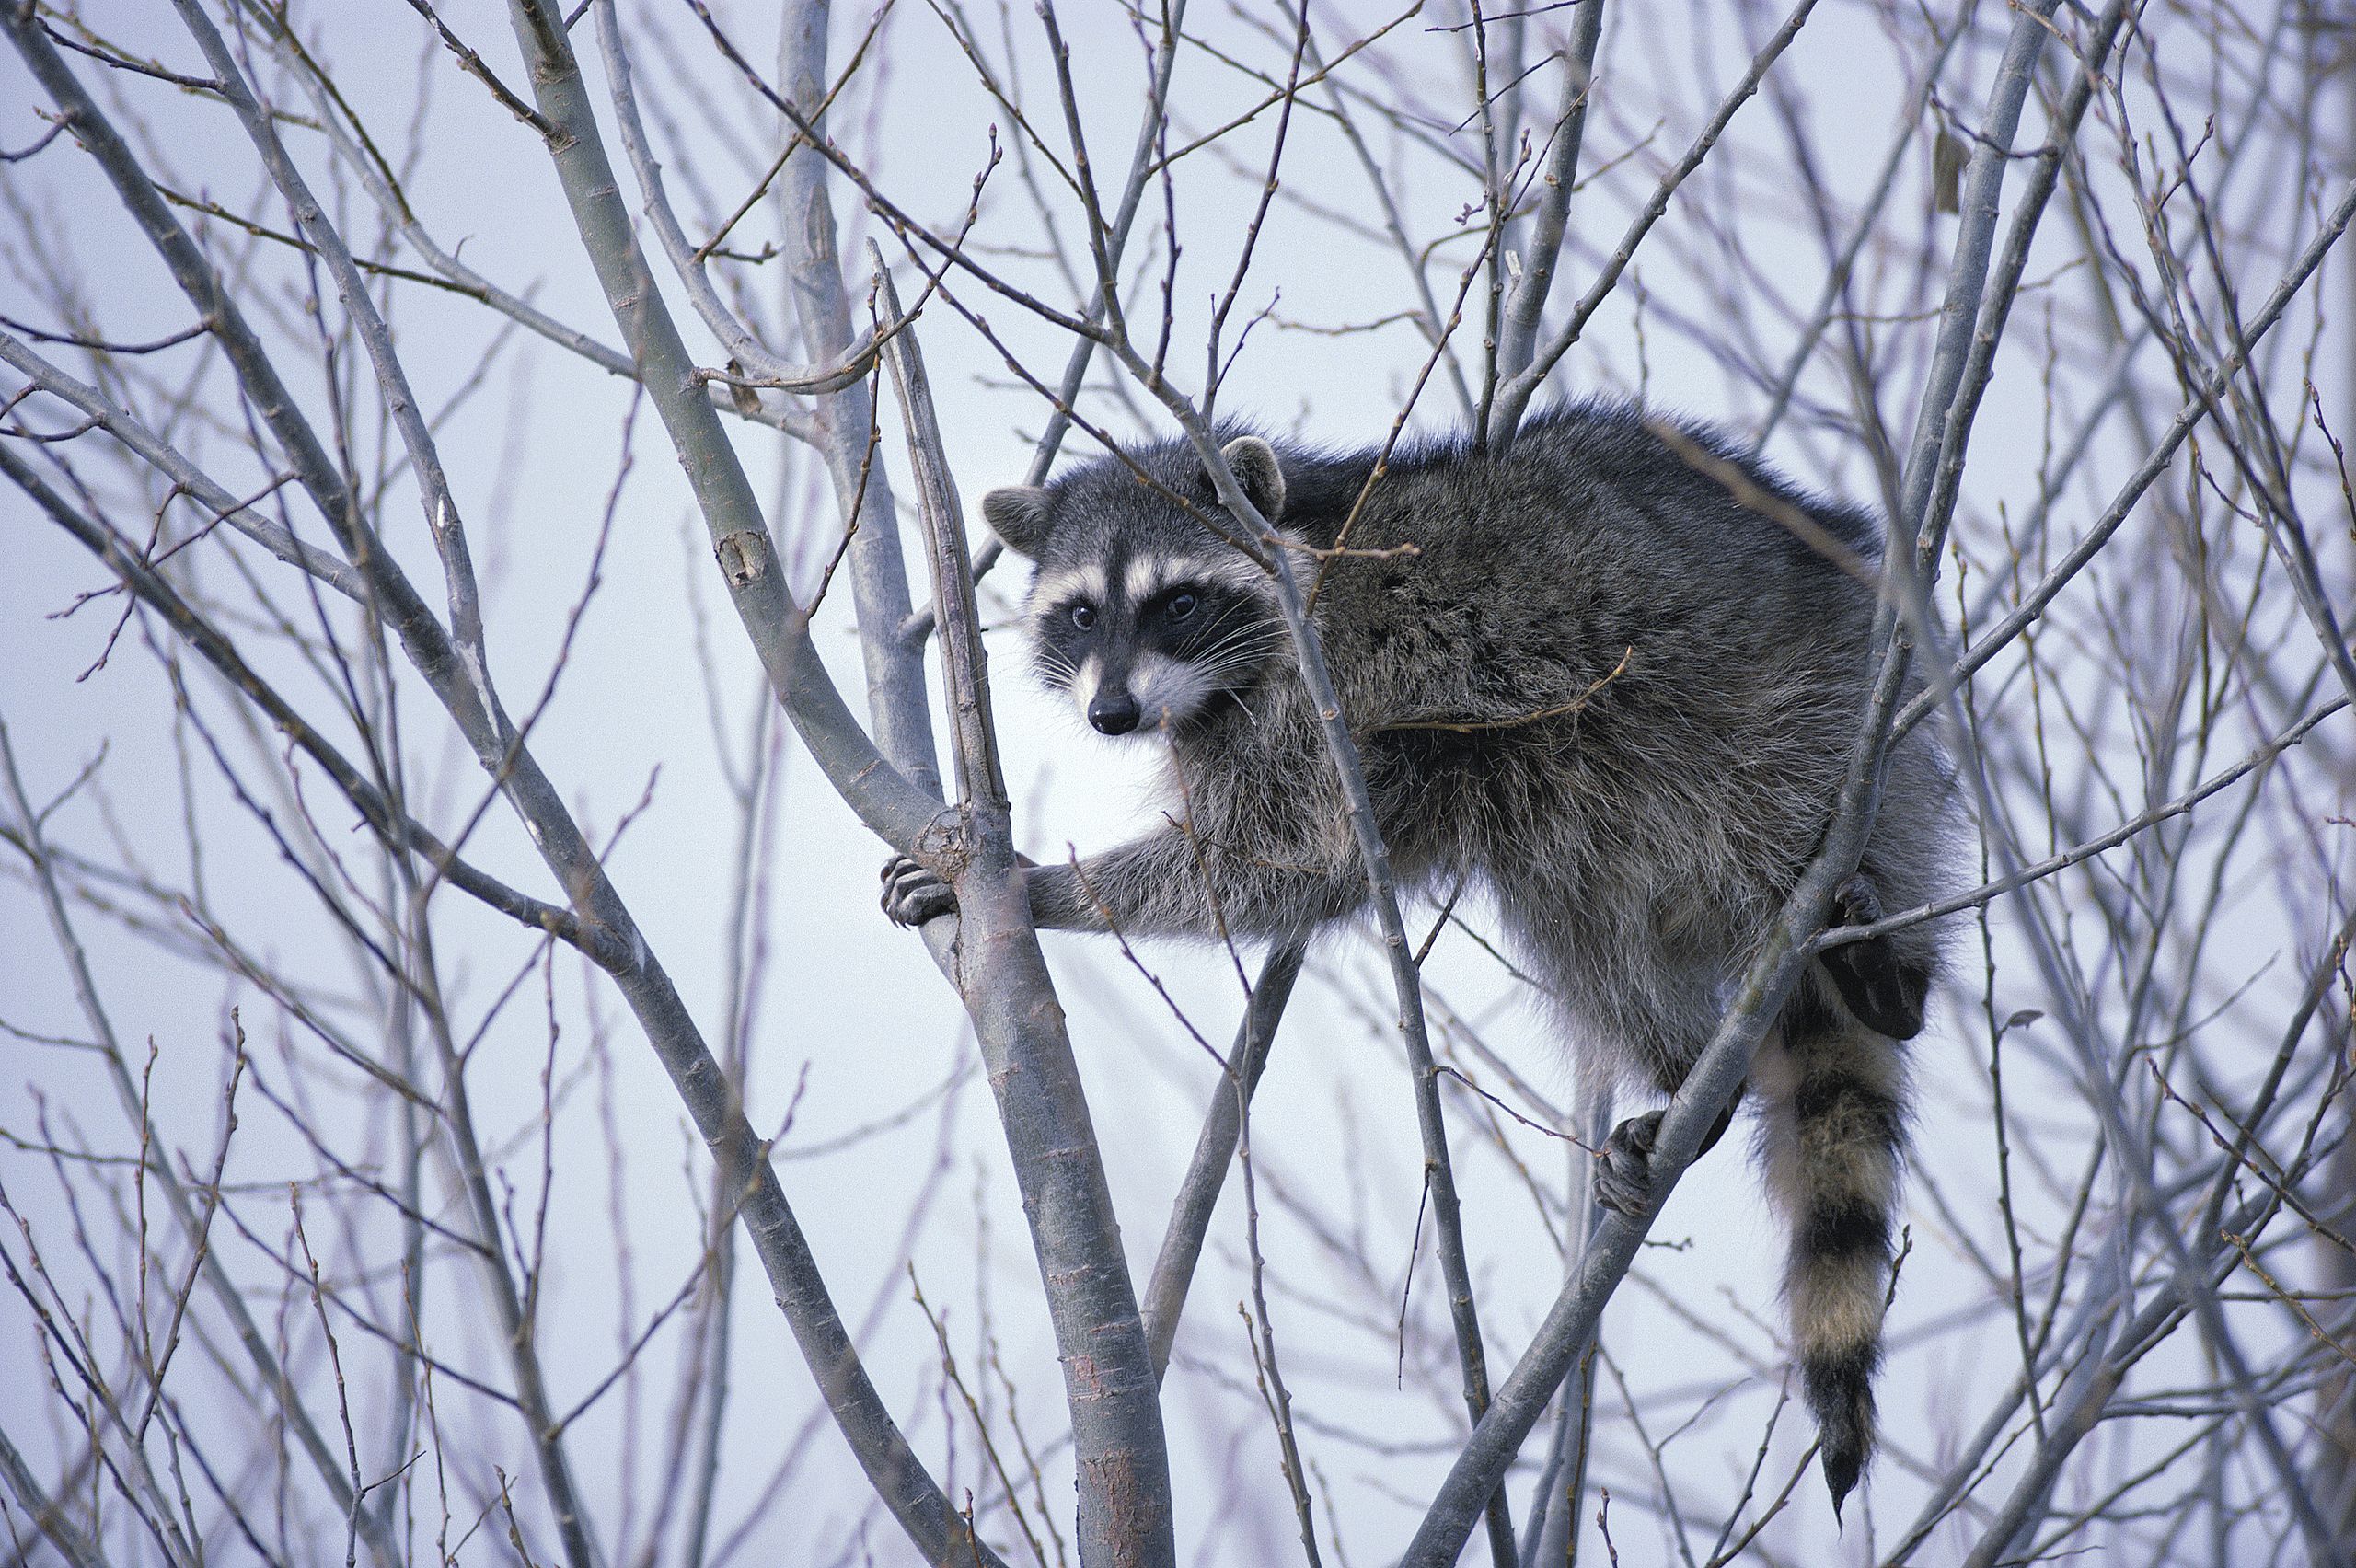 Find out what will scare a raccoon away.